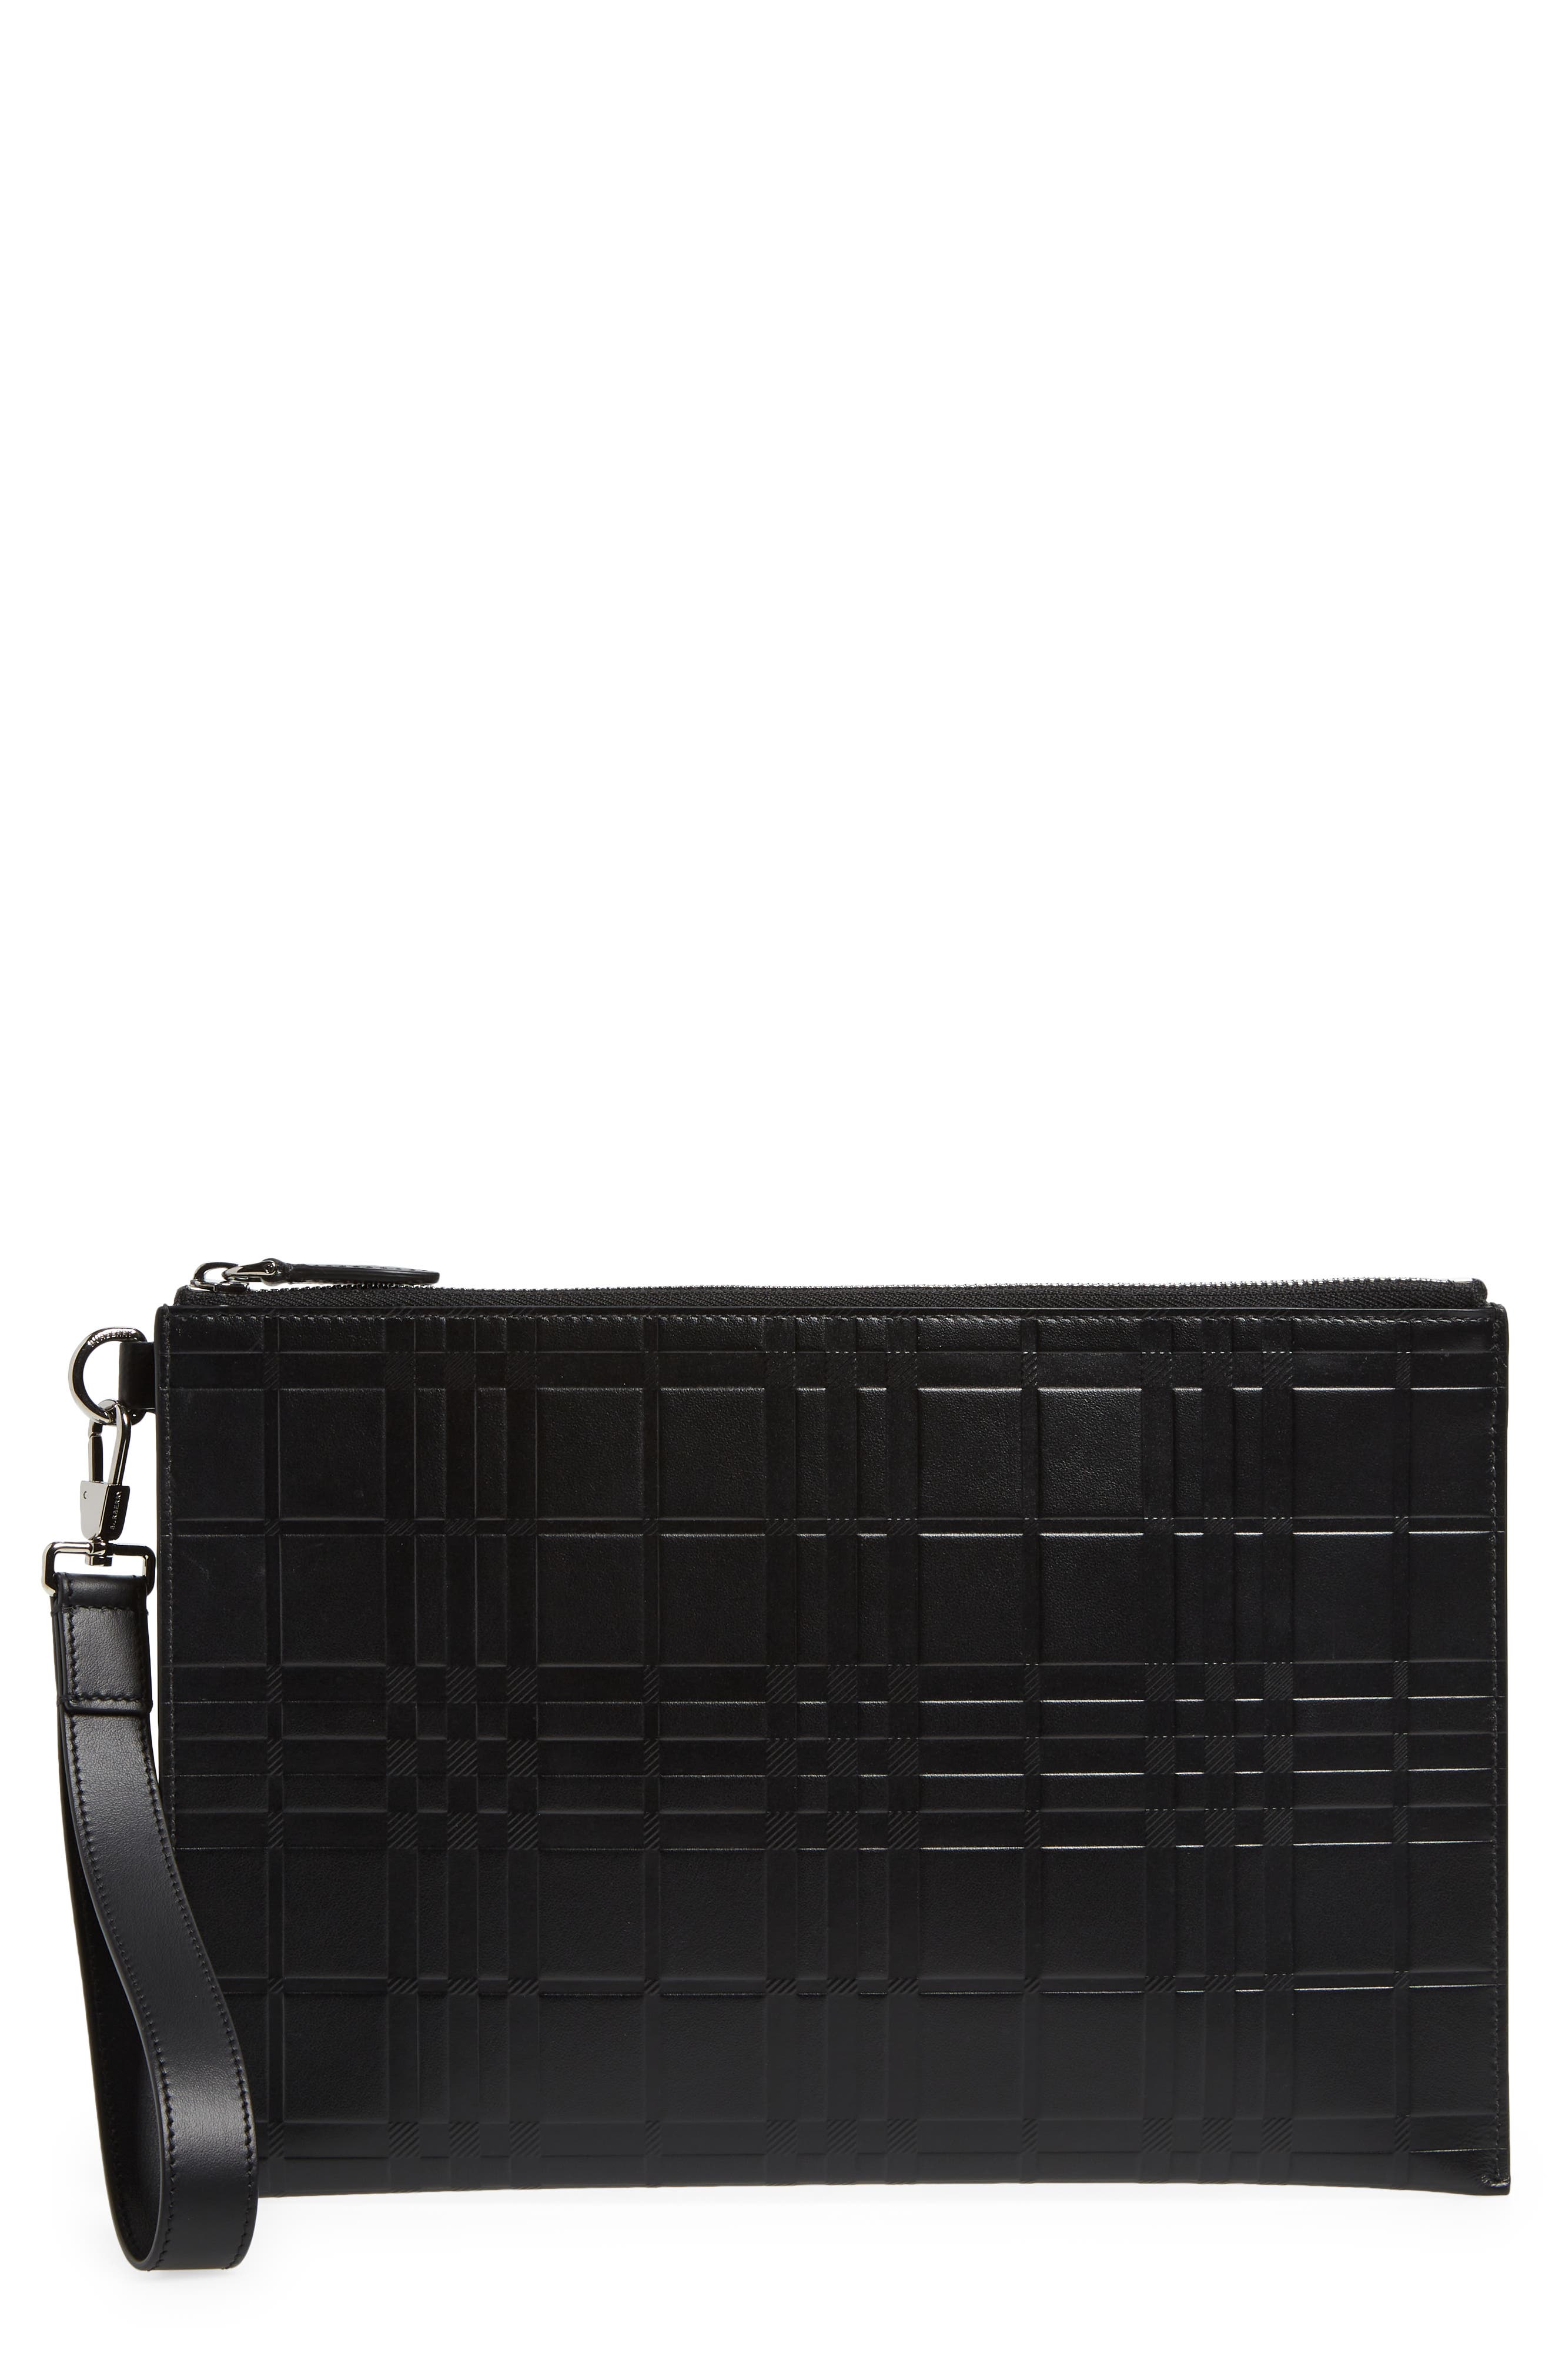 Burberry Edin Check Embossed Zip Leather Pouch in Black at Nordstrom